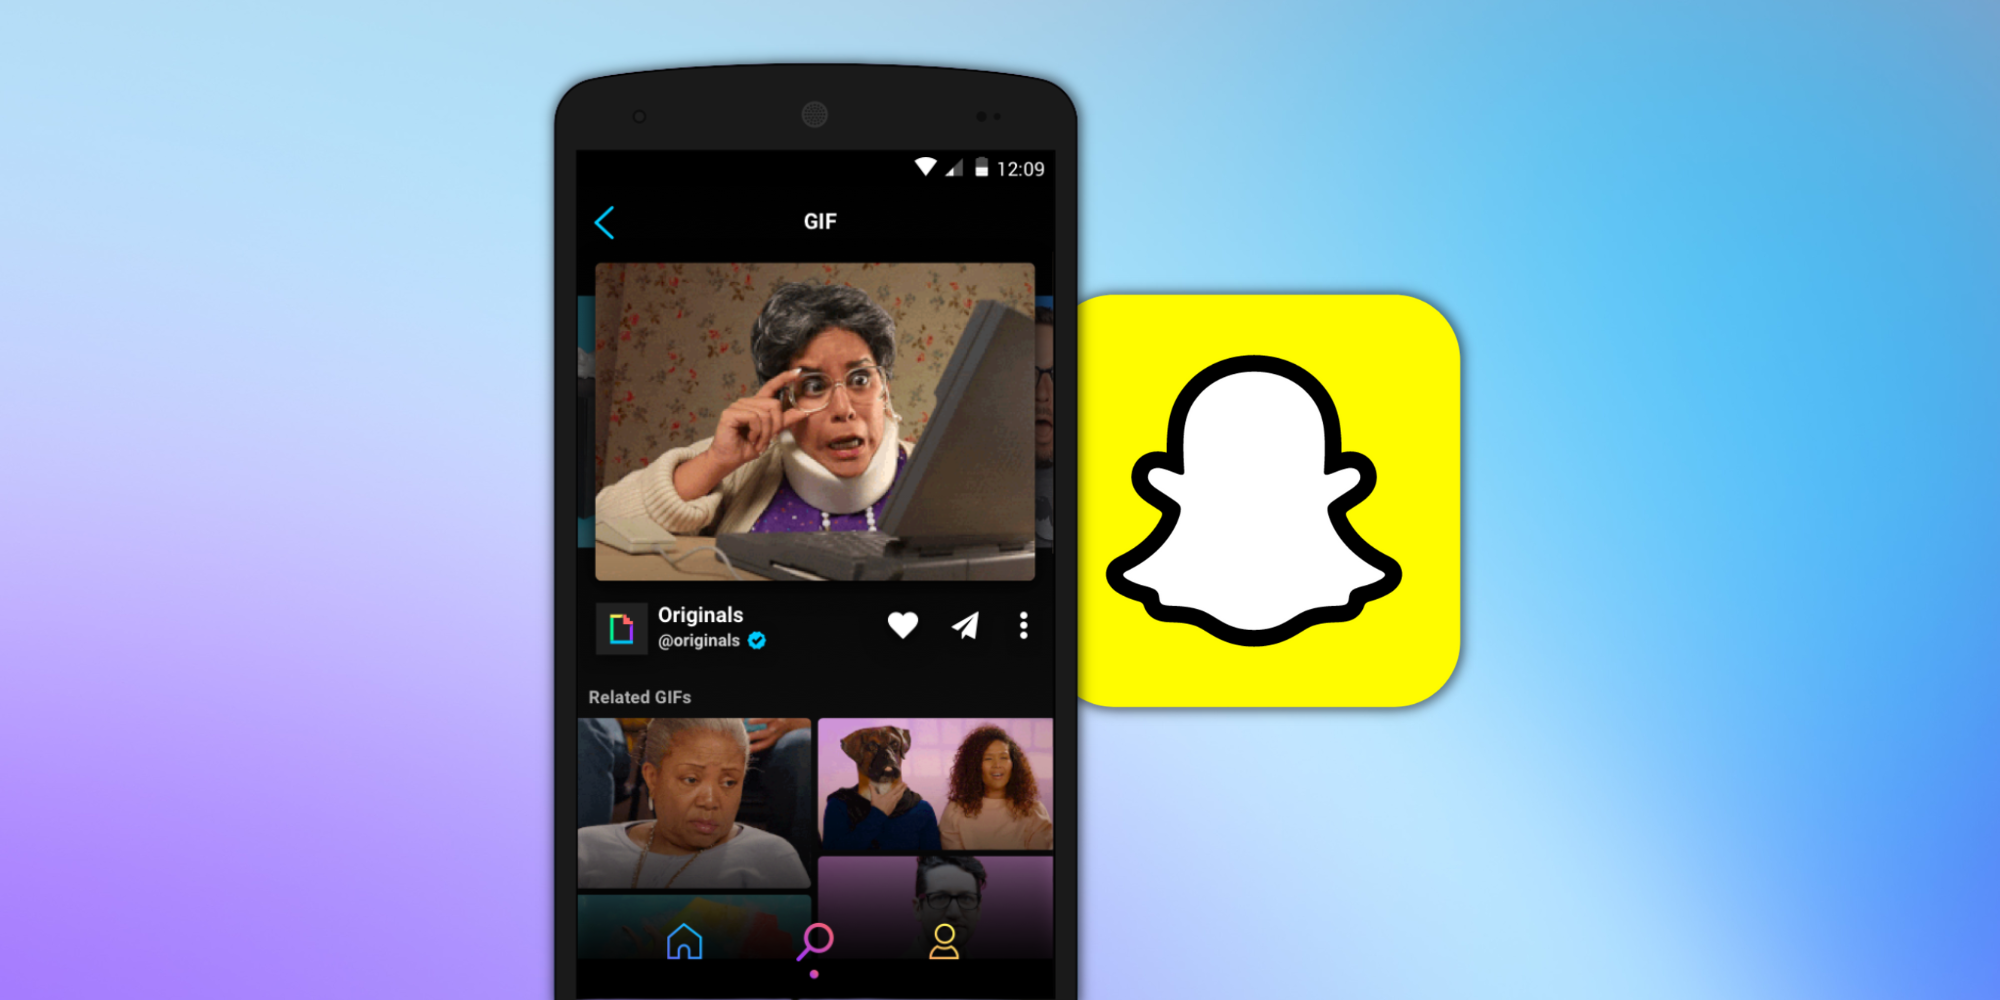 chris aguiar add how to send gif in snapchat photo